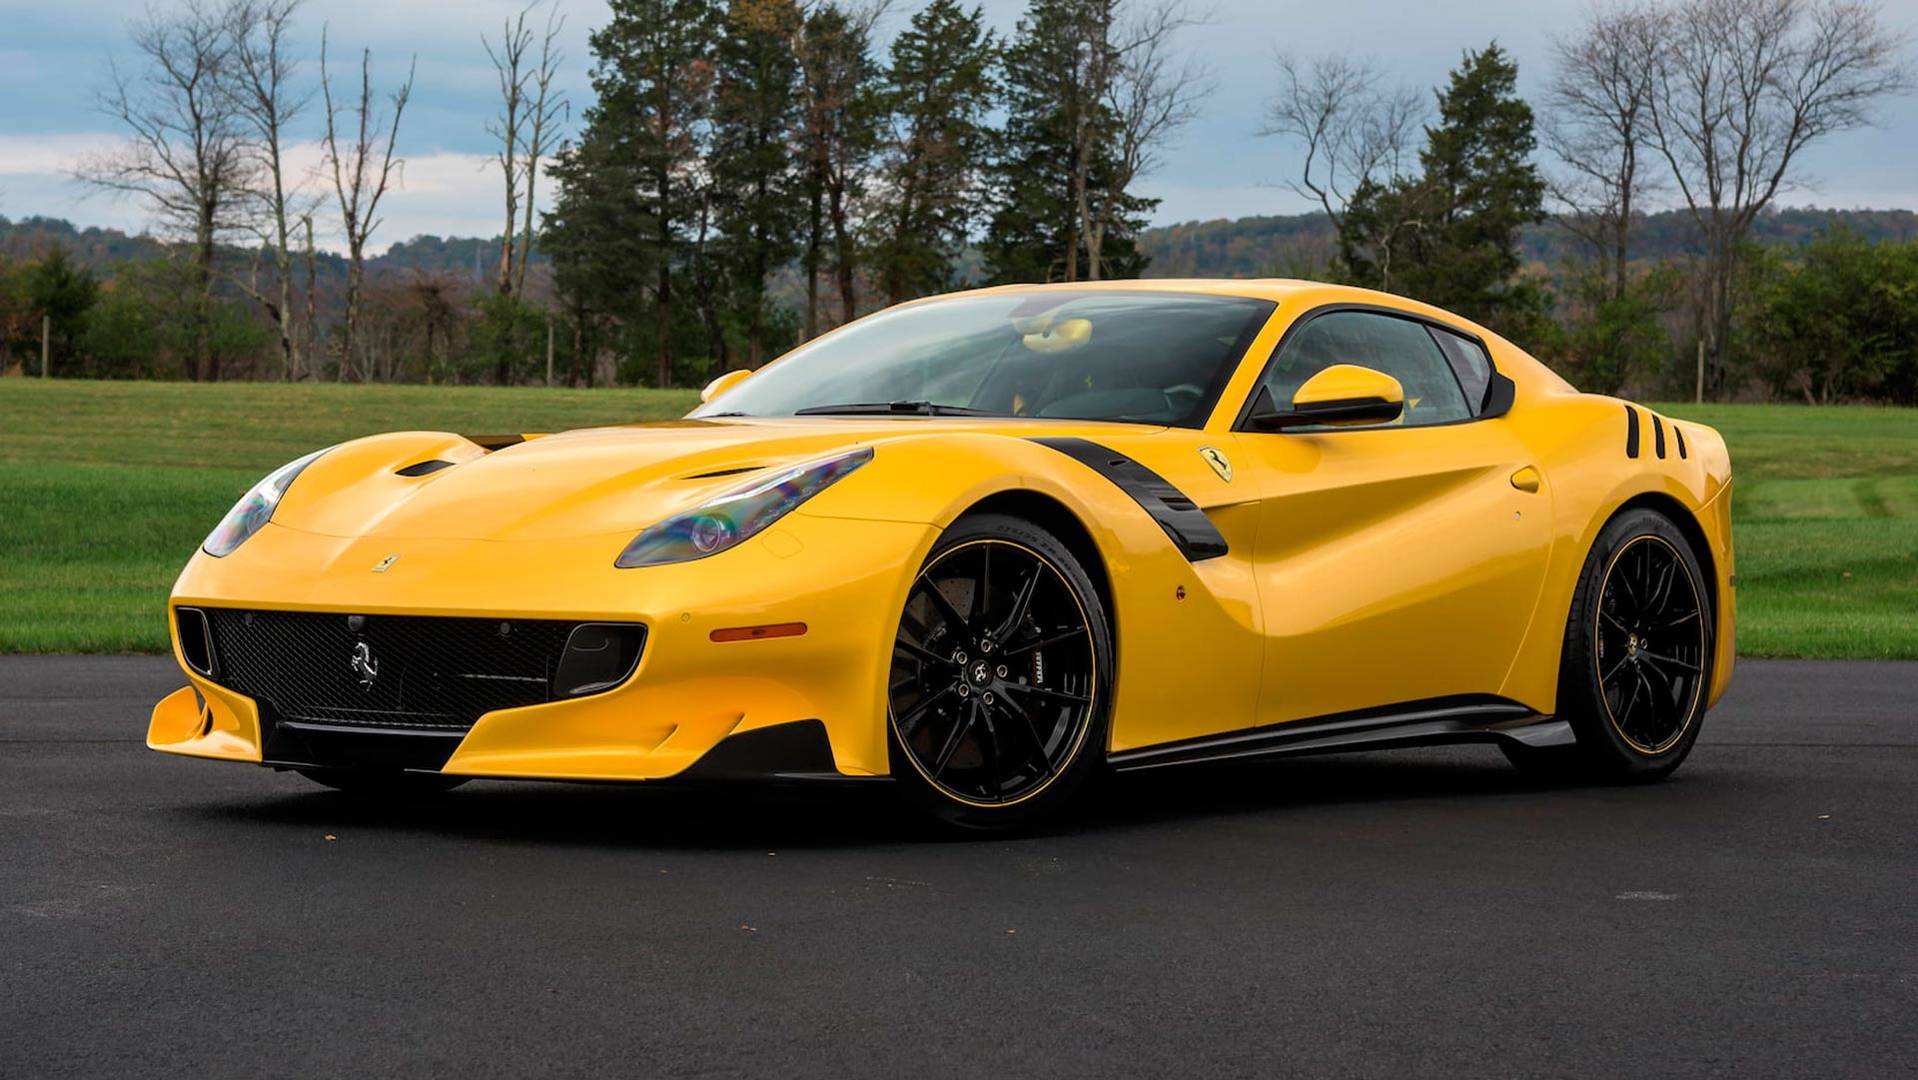 Ferrari F12TdF With $130K In Options Could Bring $1.3M At Auction